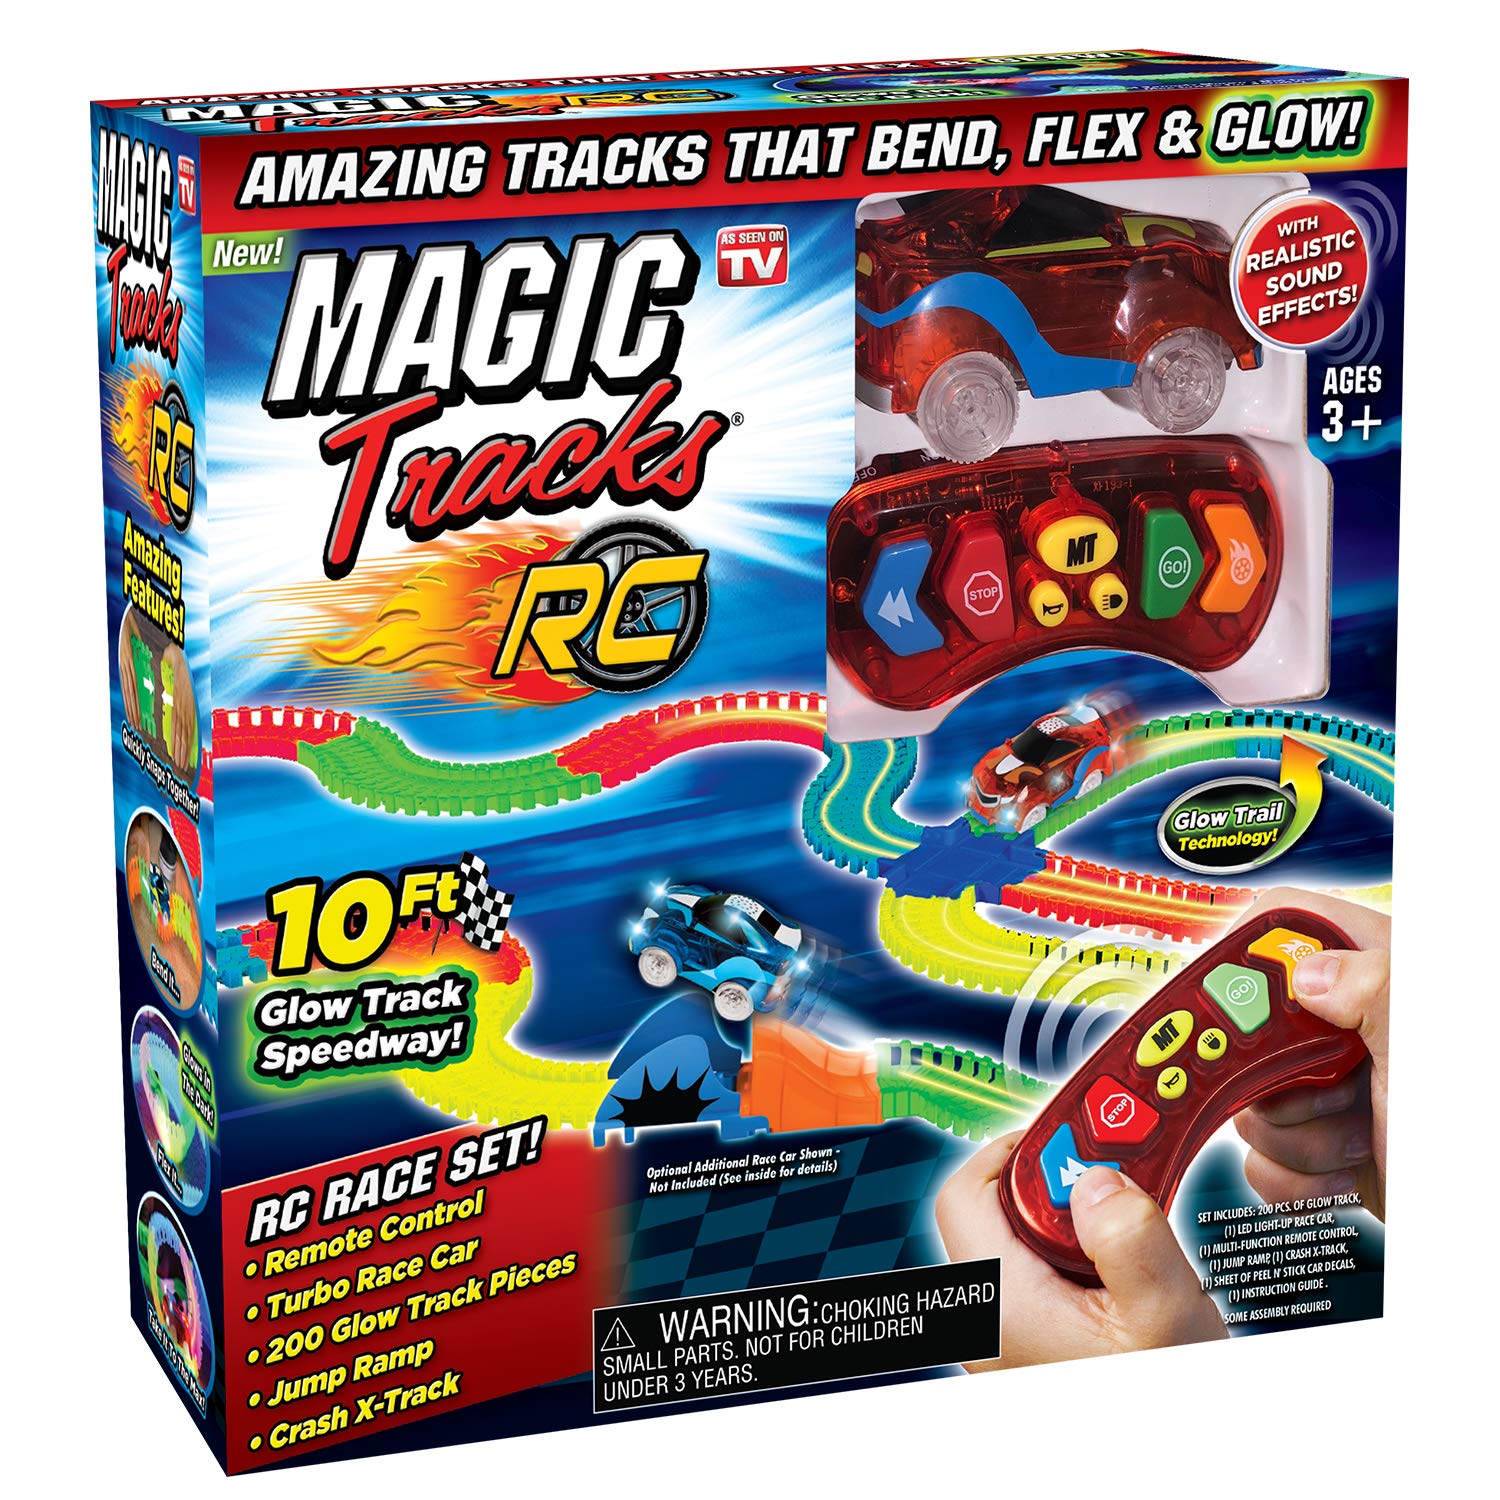 Ontel Magic Tracks RC - Remote Control Turbo Race Cars & 10 ft of Flexible, Bendable Glow in the Dark Racetrack - As Seen on TV, Color may Vary